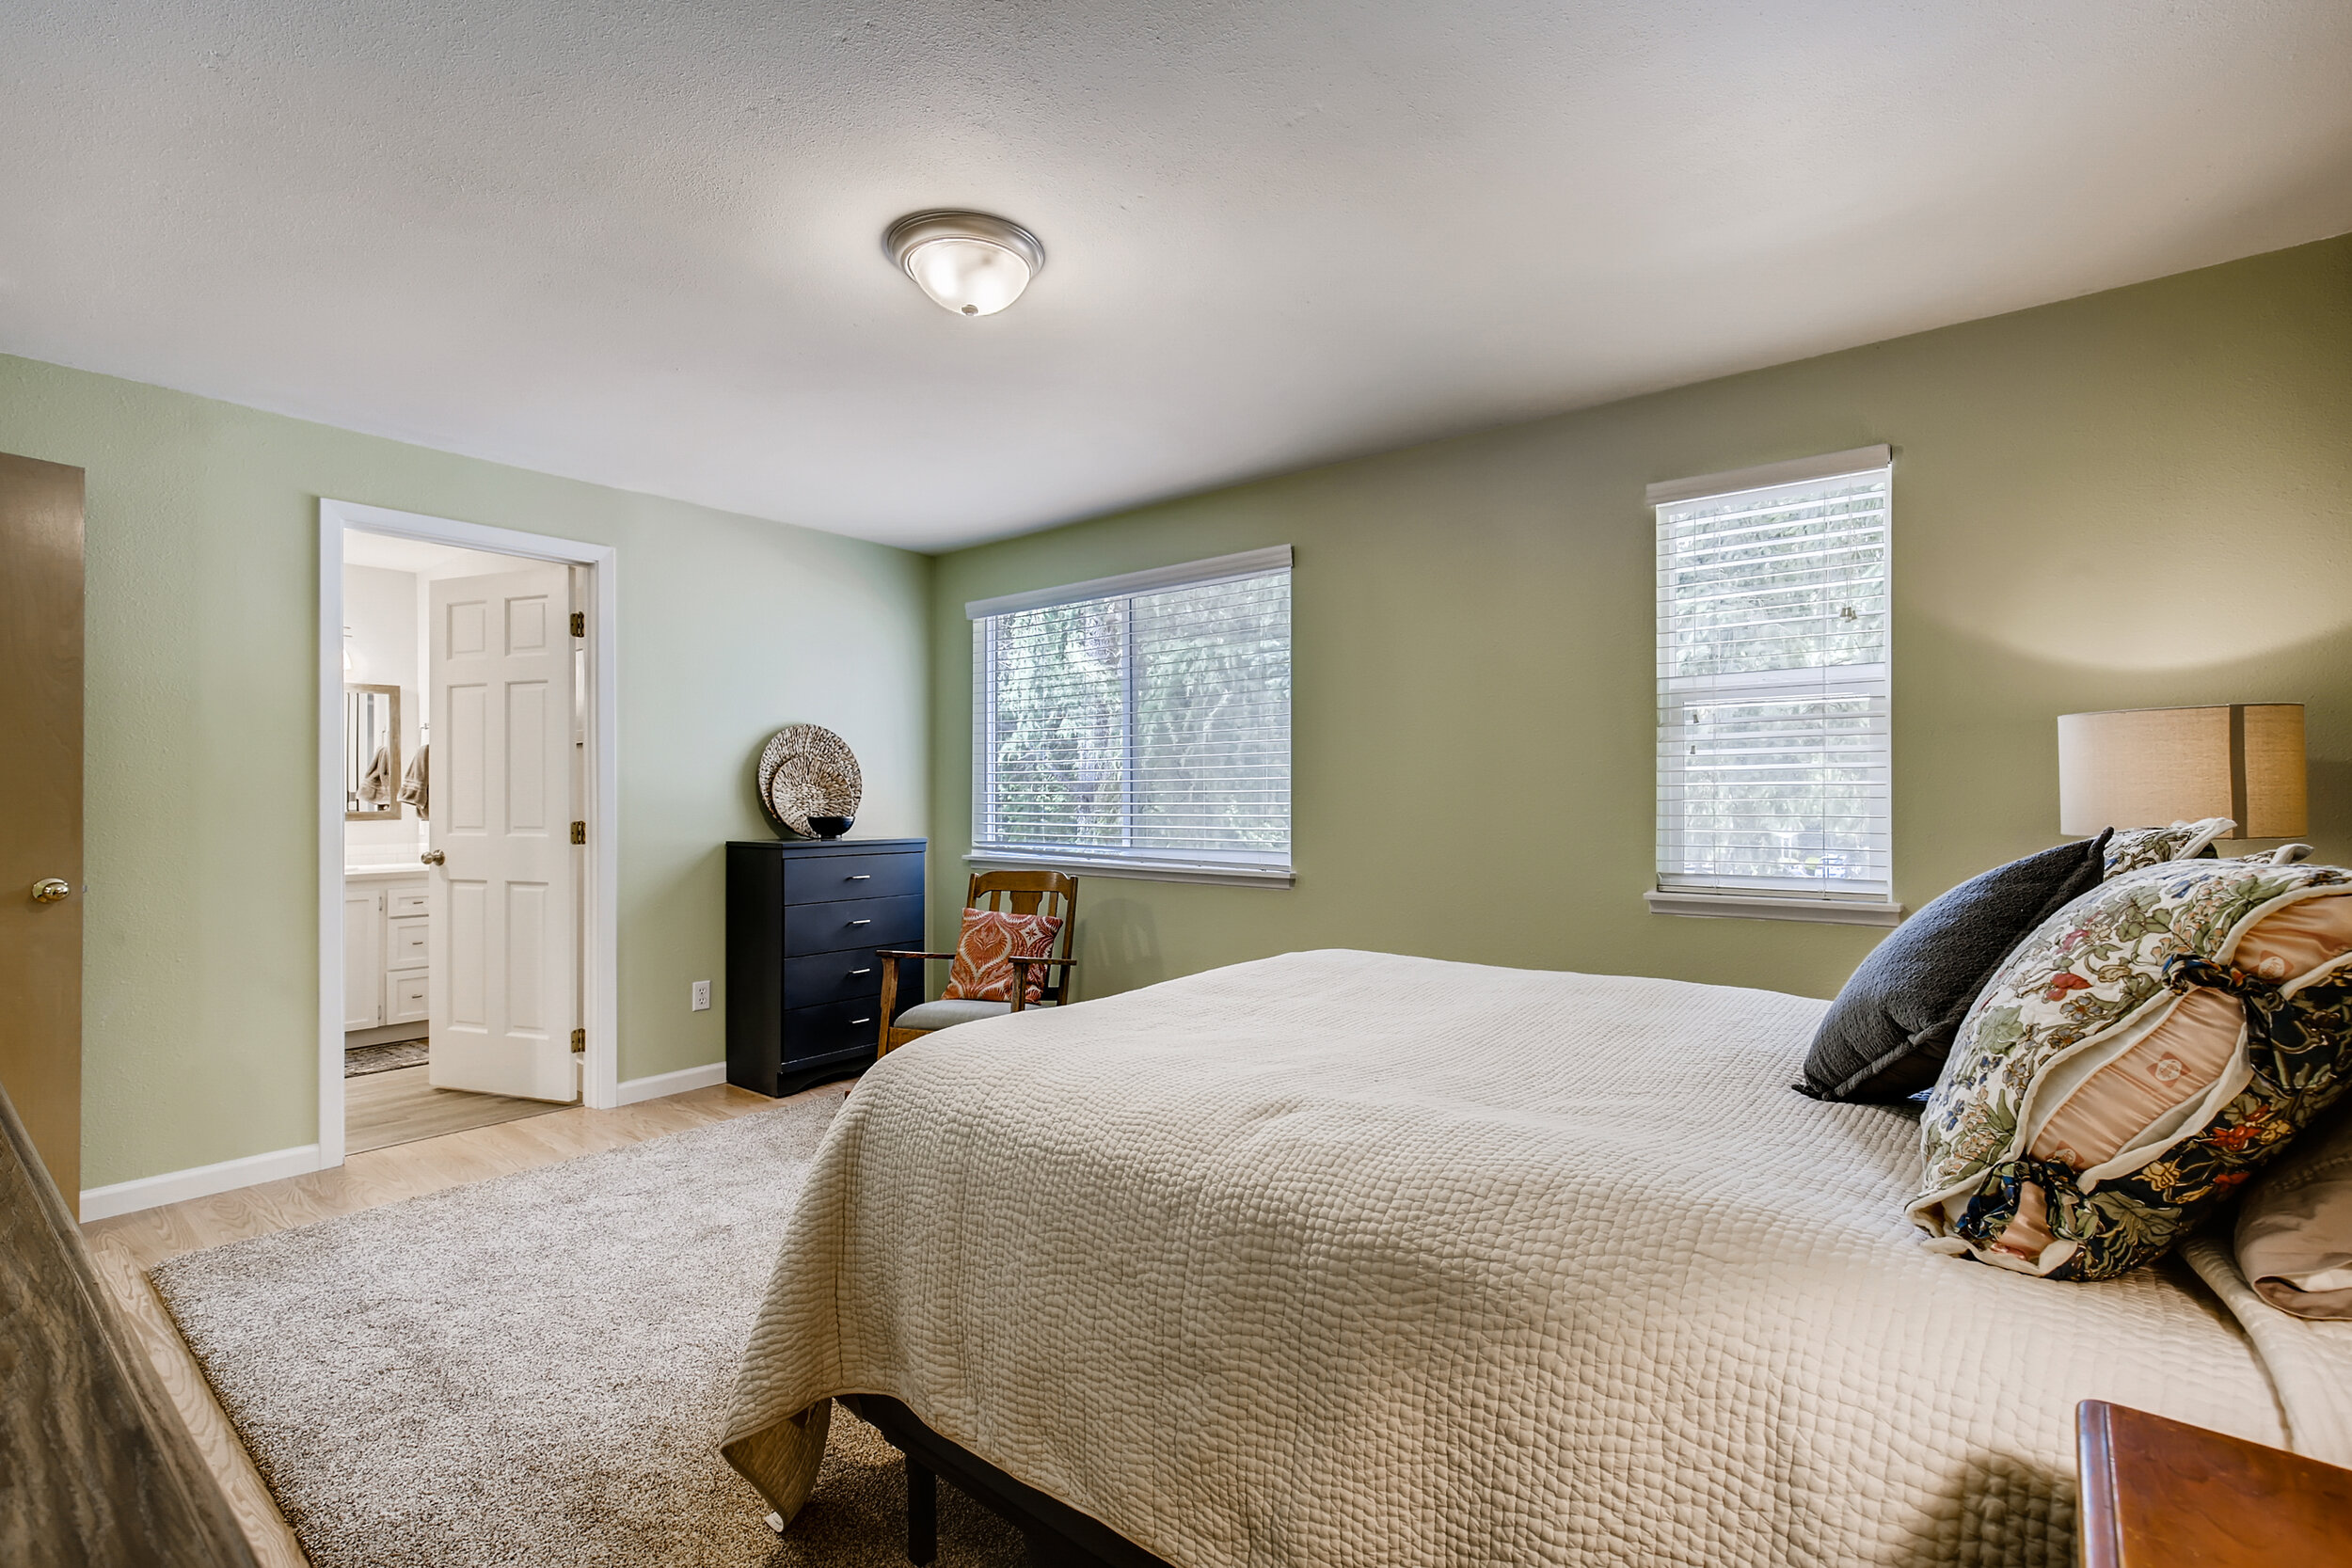 21604 9th Ave W Bothell WA - Print Quality - 016 - 22 2nd Floor Master Bedroom.jpg